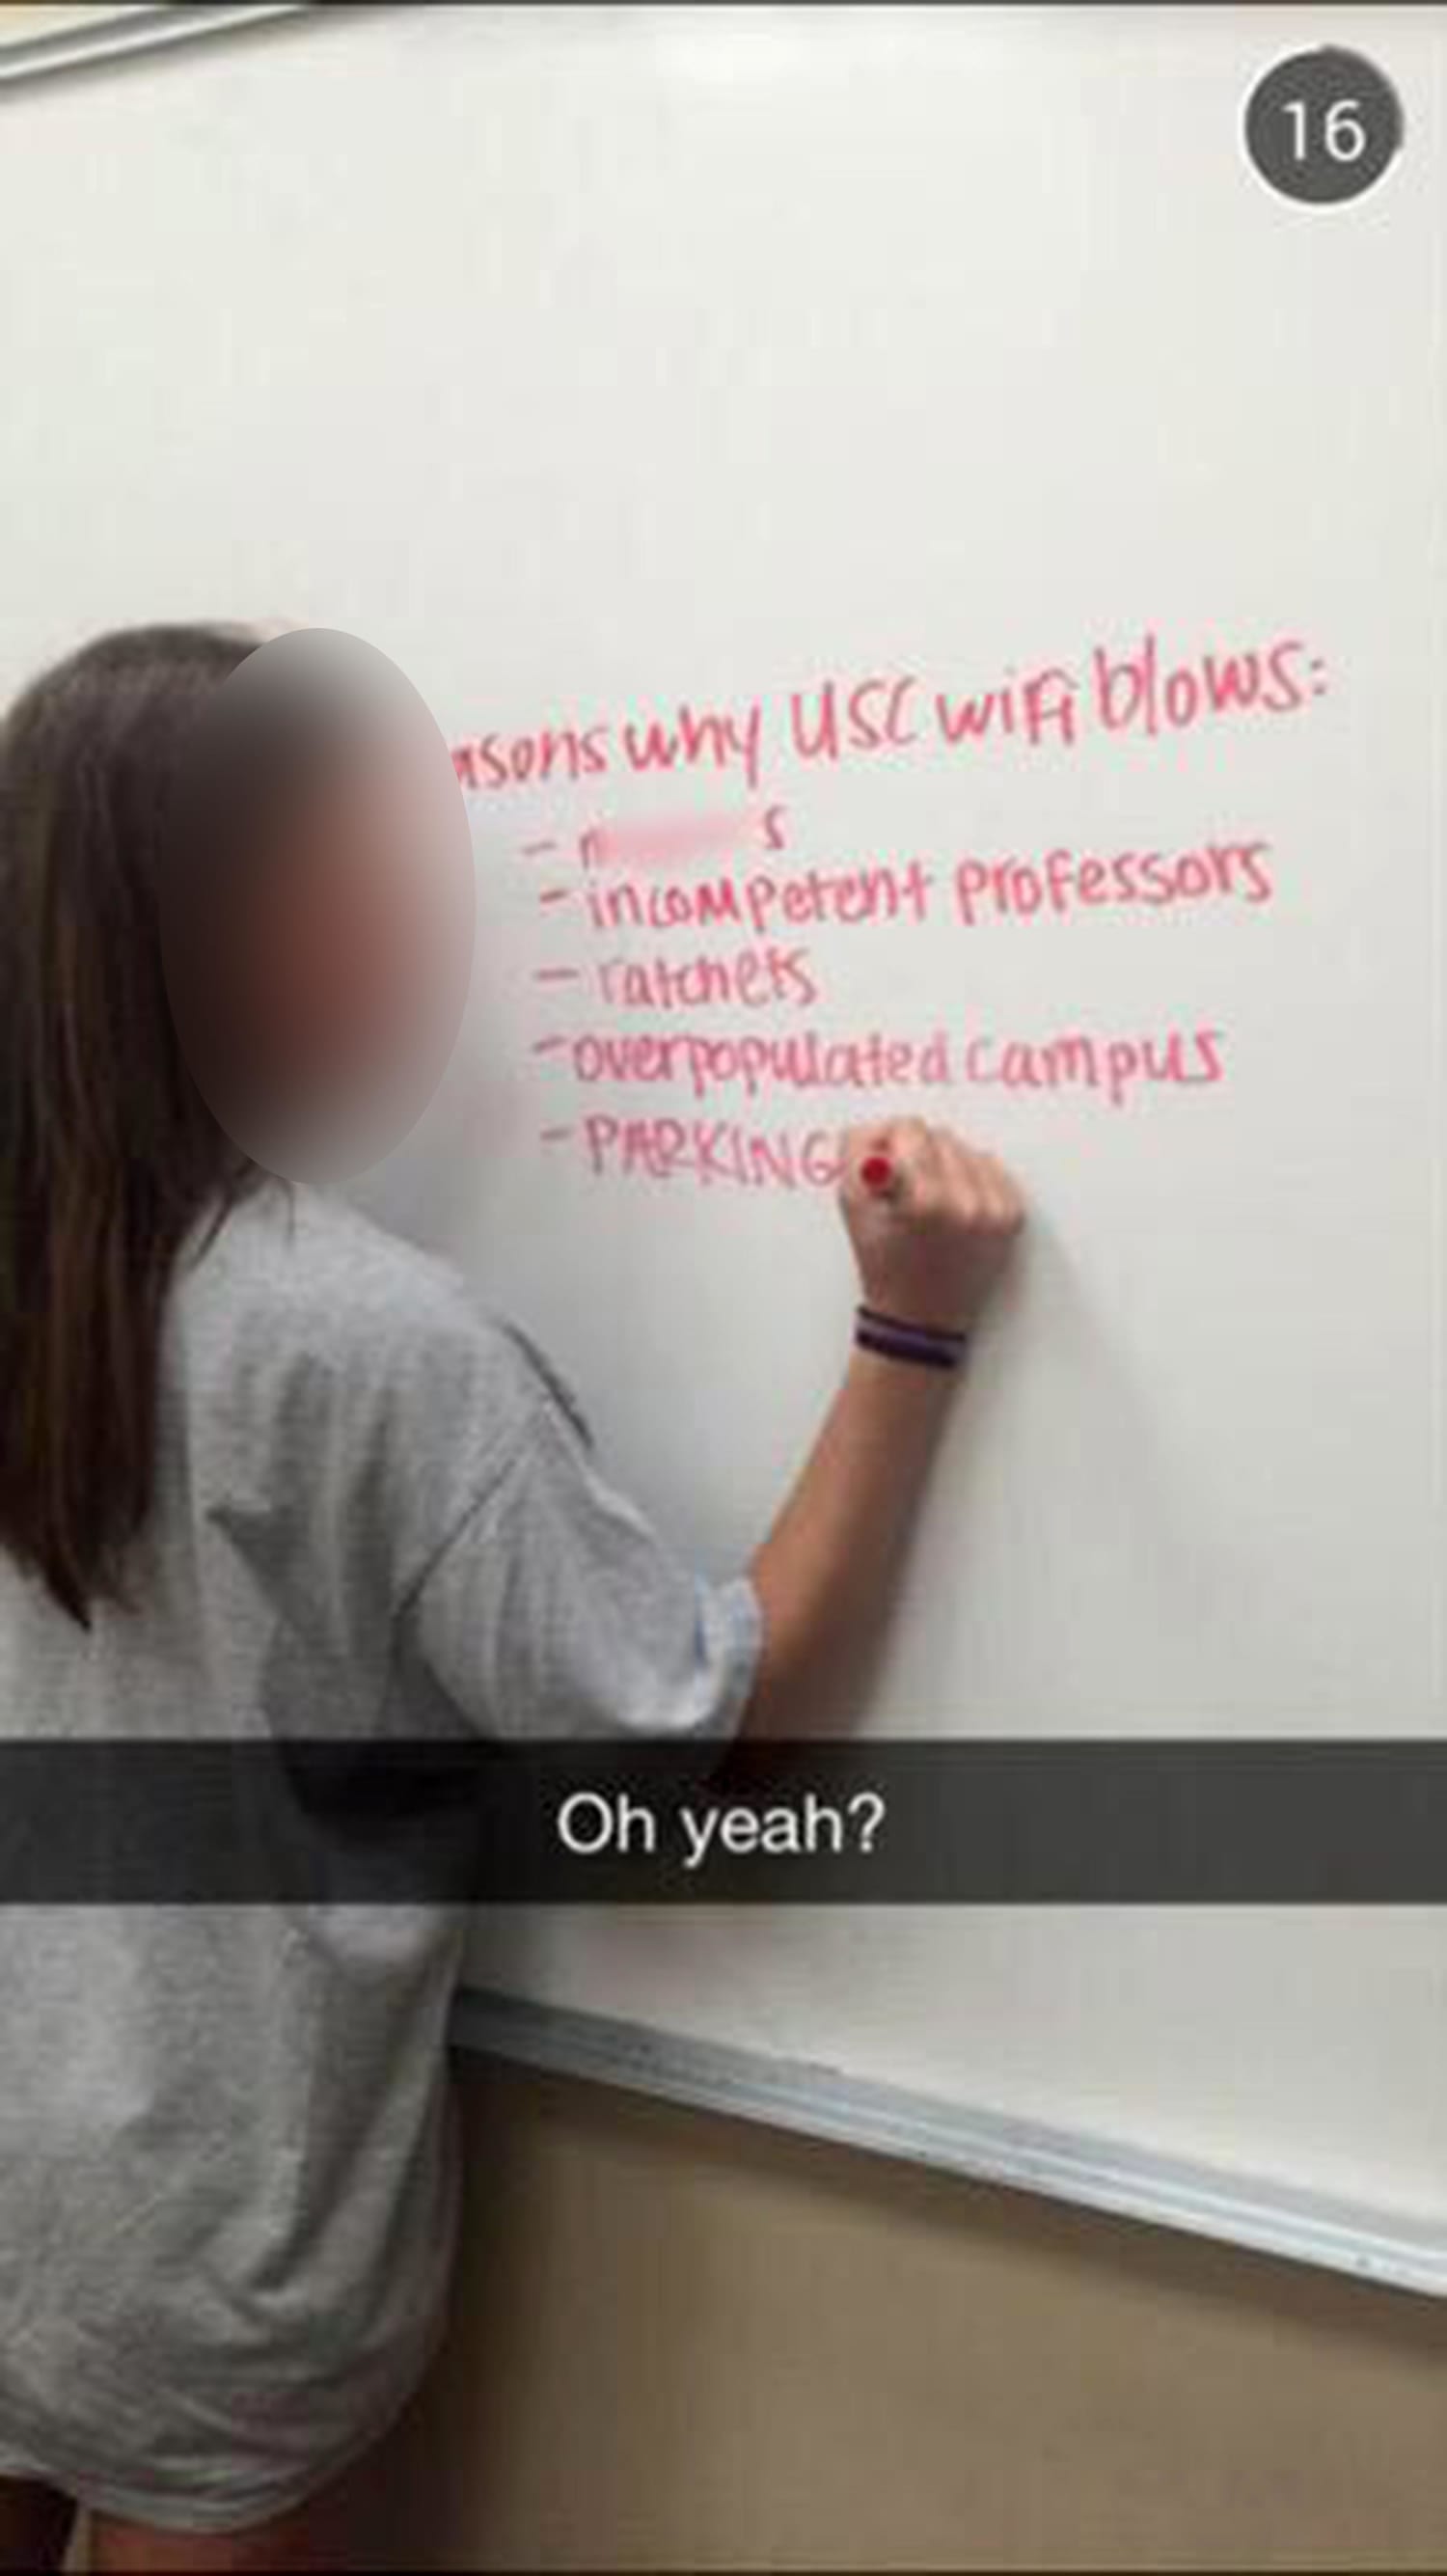 University of South Carolina Student Suspended for Picture Showing Racist Word - NBC News